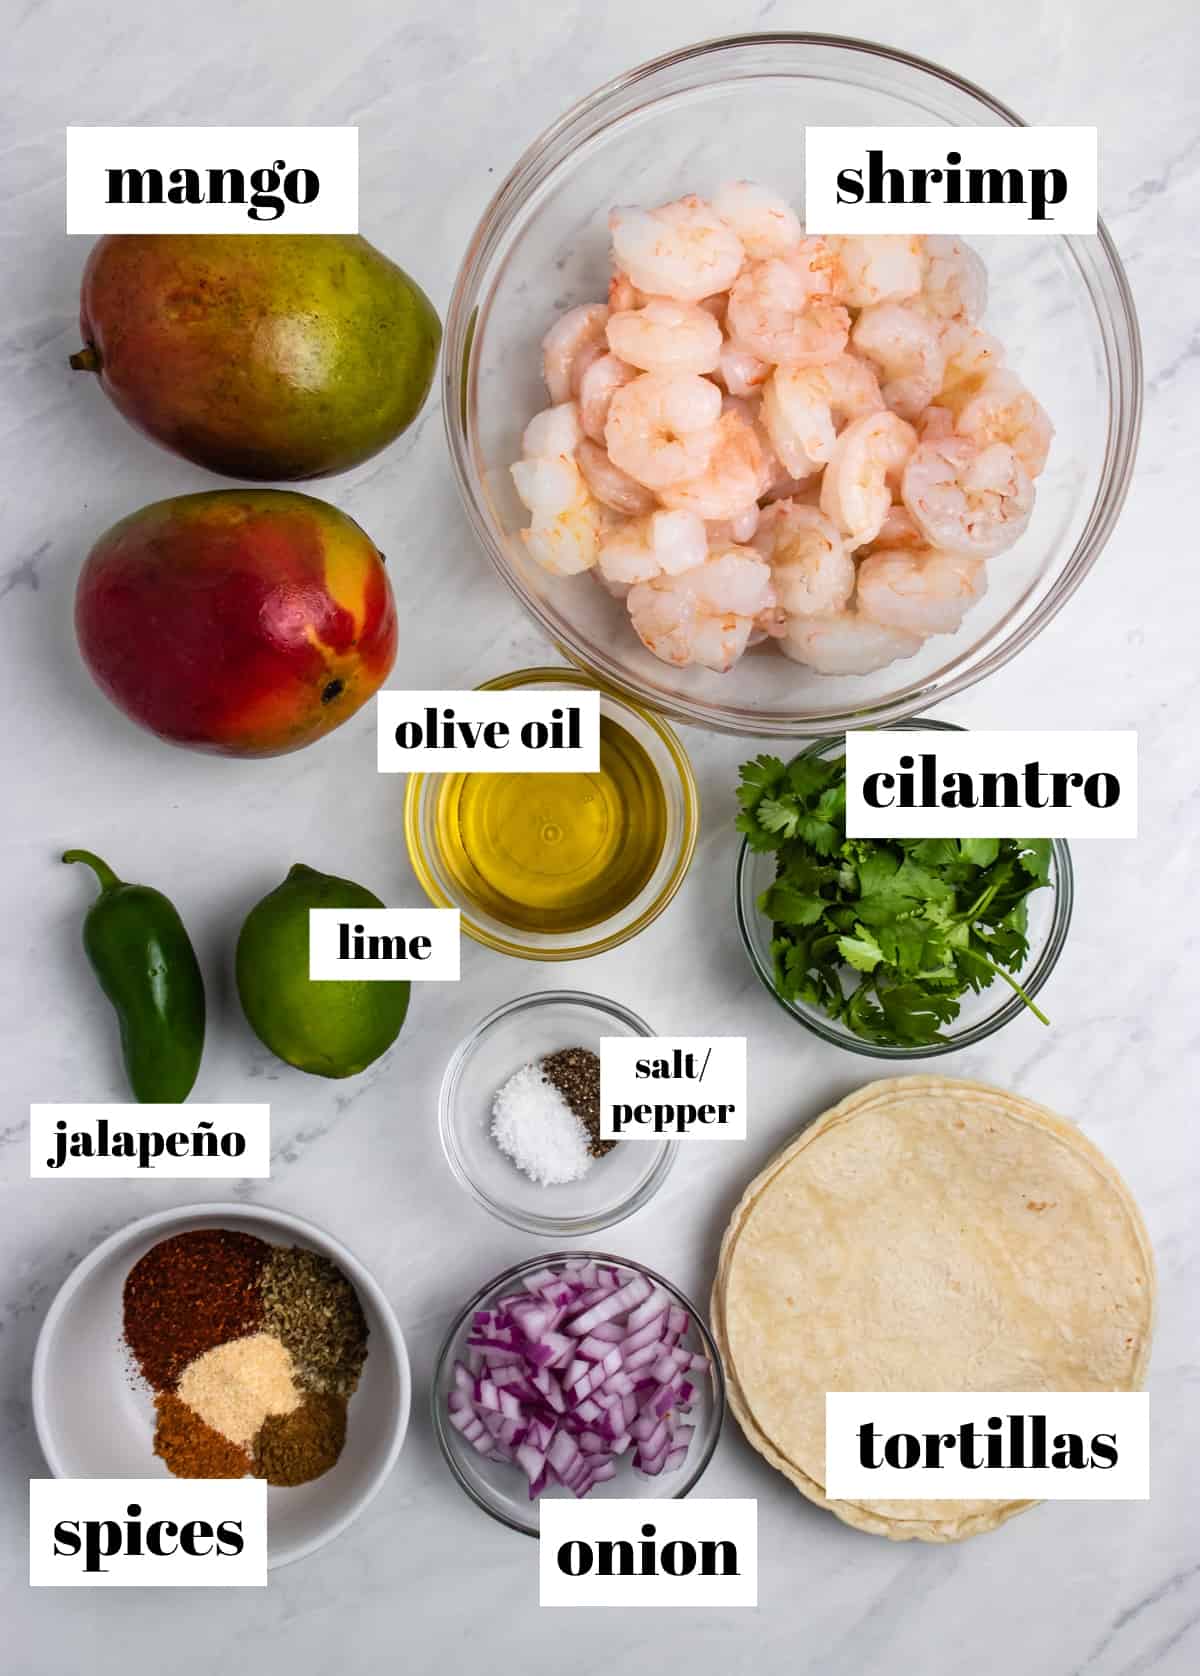 Jalapeño, shrimp, tortillas, cilantro, mango and other ingredients labeled on counter.